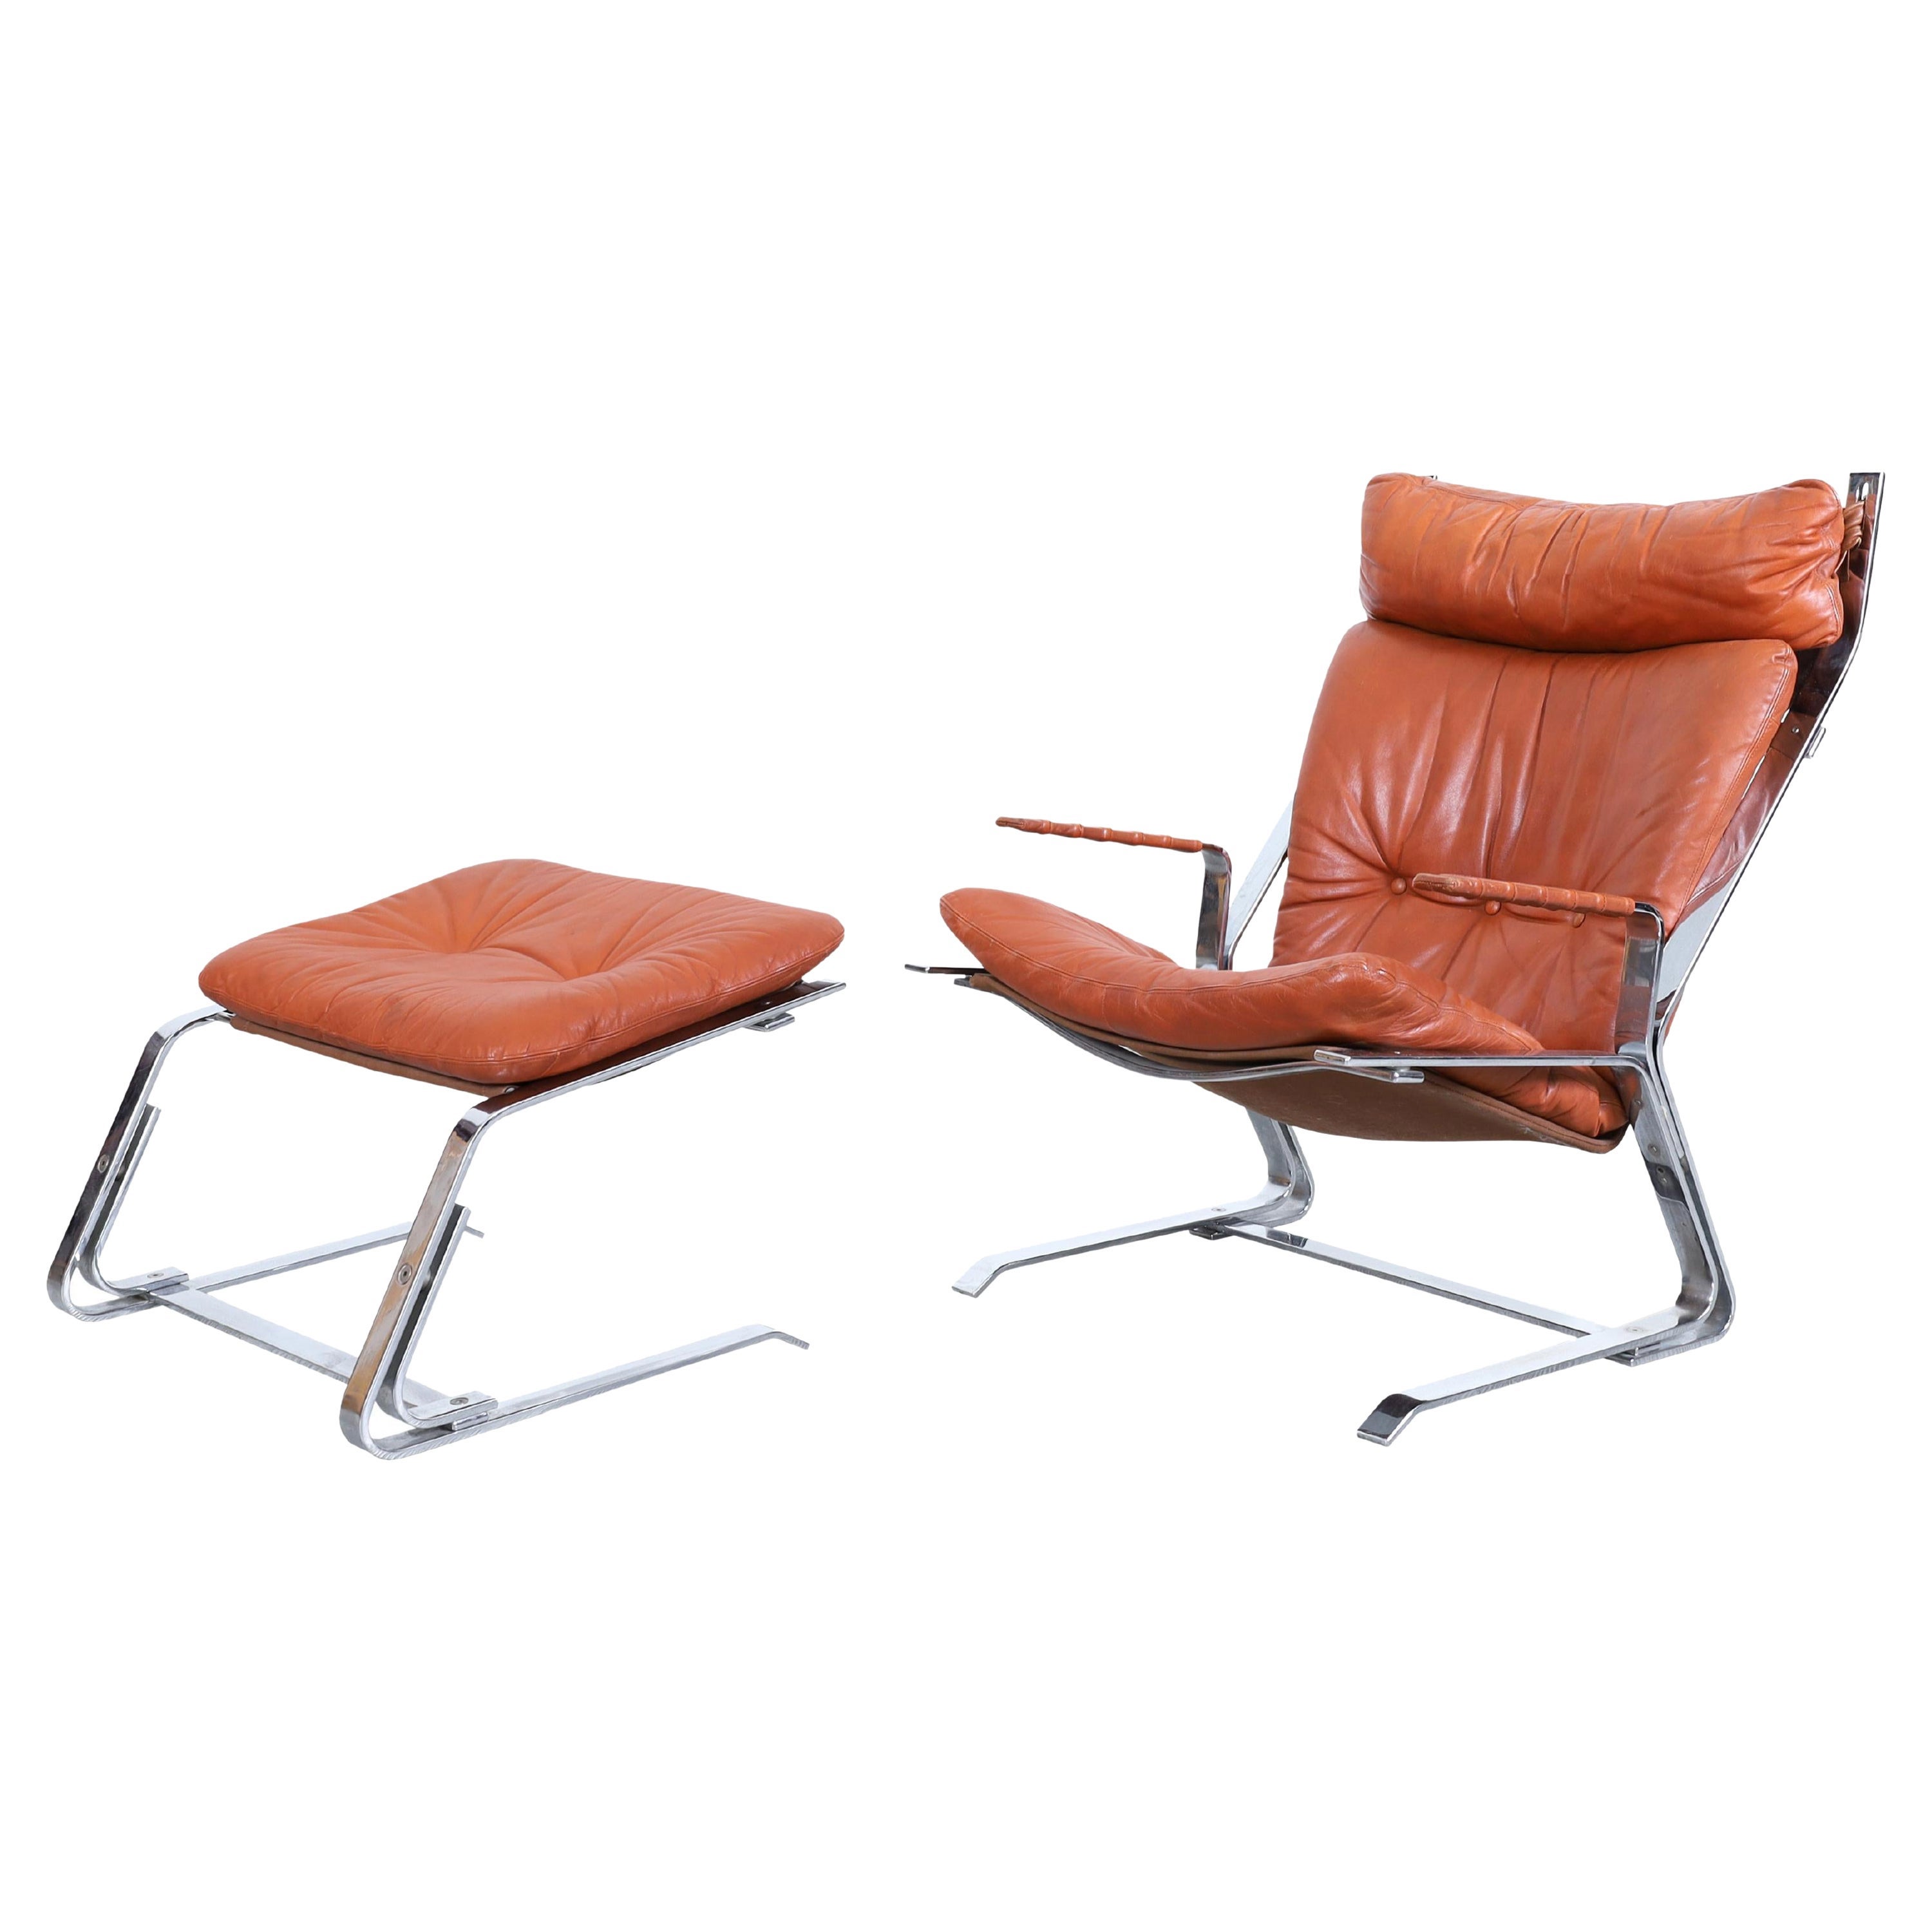 Midcentury Leather Lounge Chair and Ottoman by Elsa and Nordahl Solheim For Sale